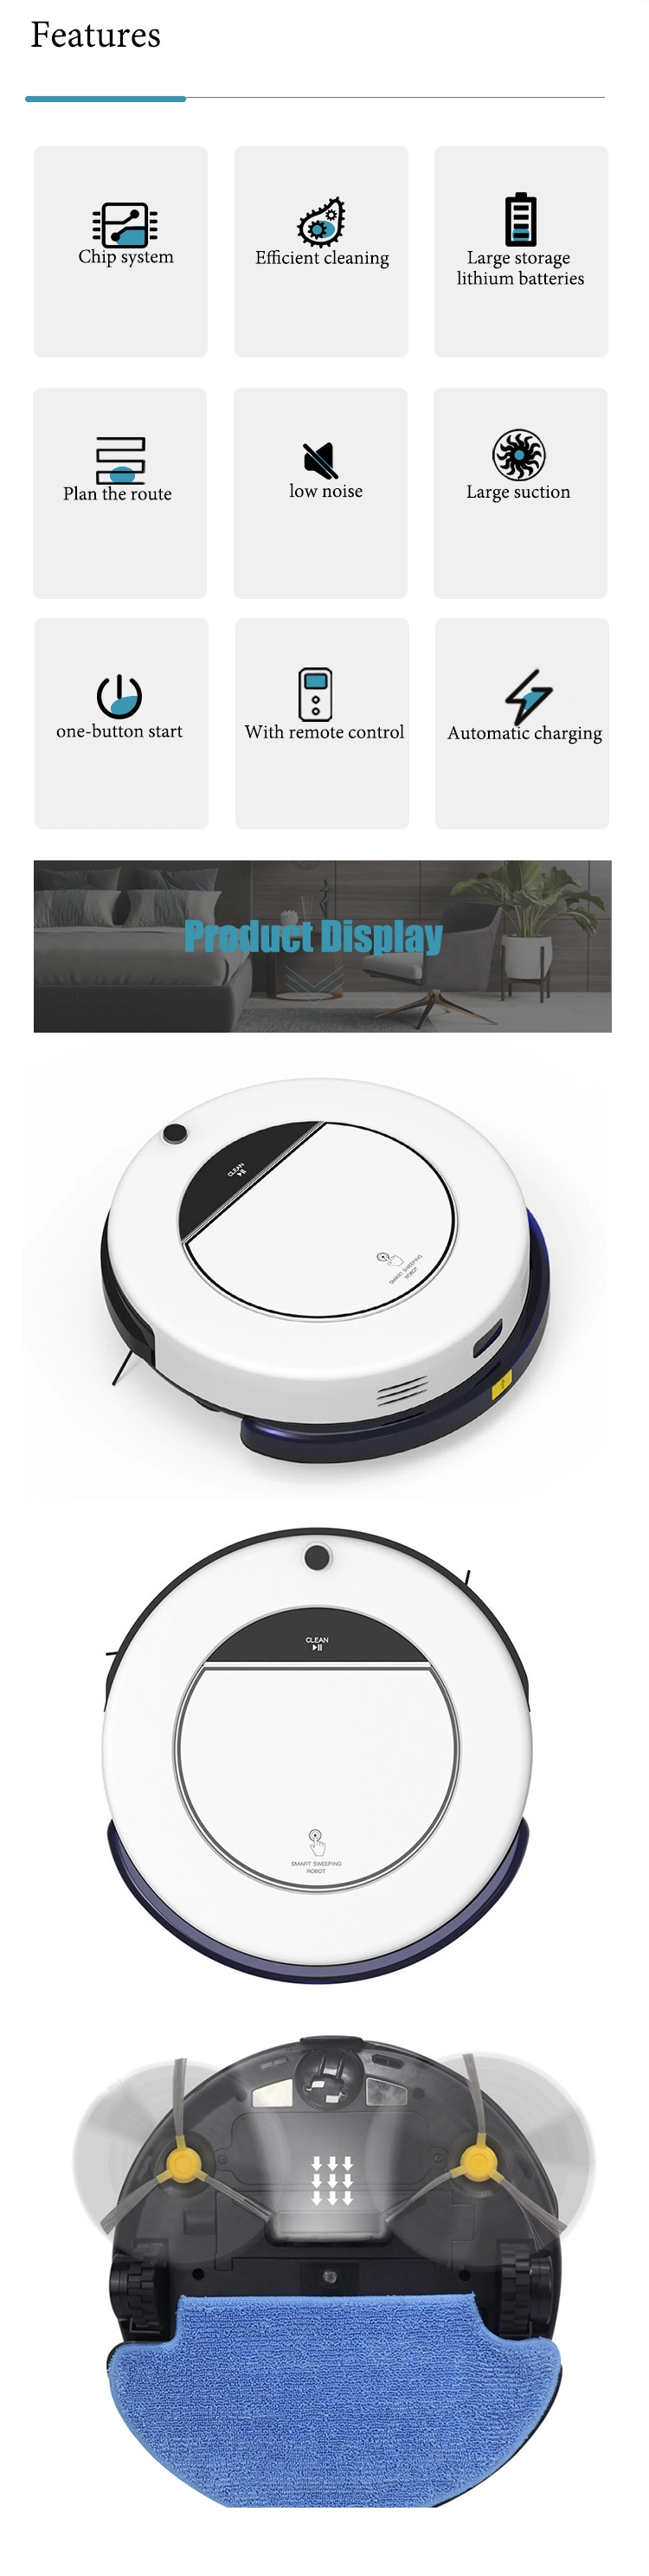 New Arrival Smart Robot Vacuum Cleaner with Sweeping Sucking and Mopping Integration